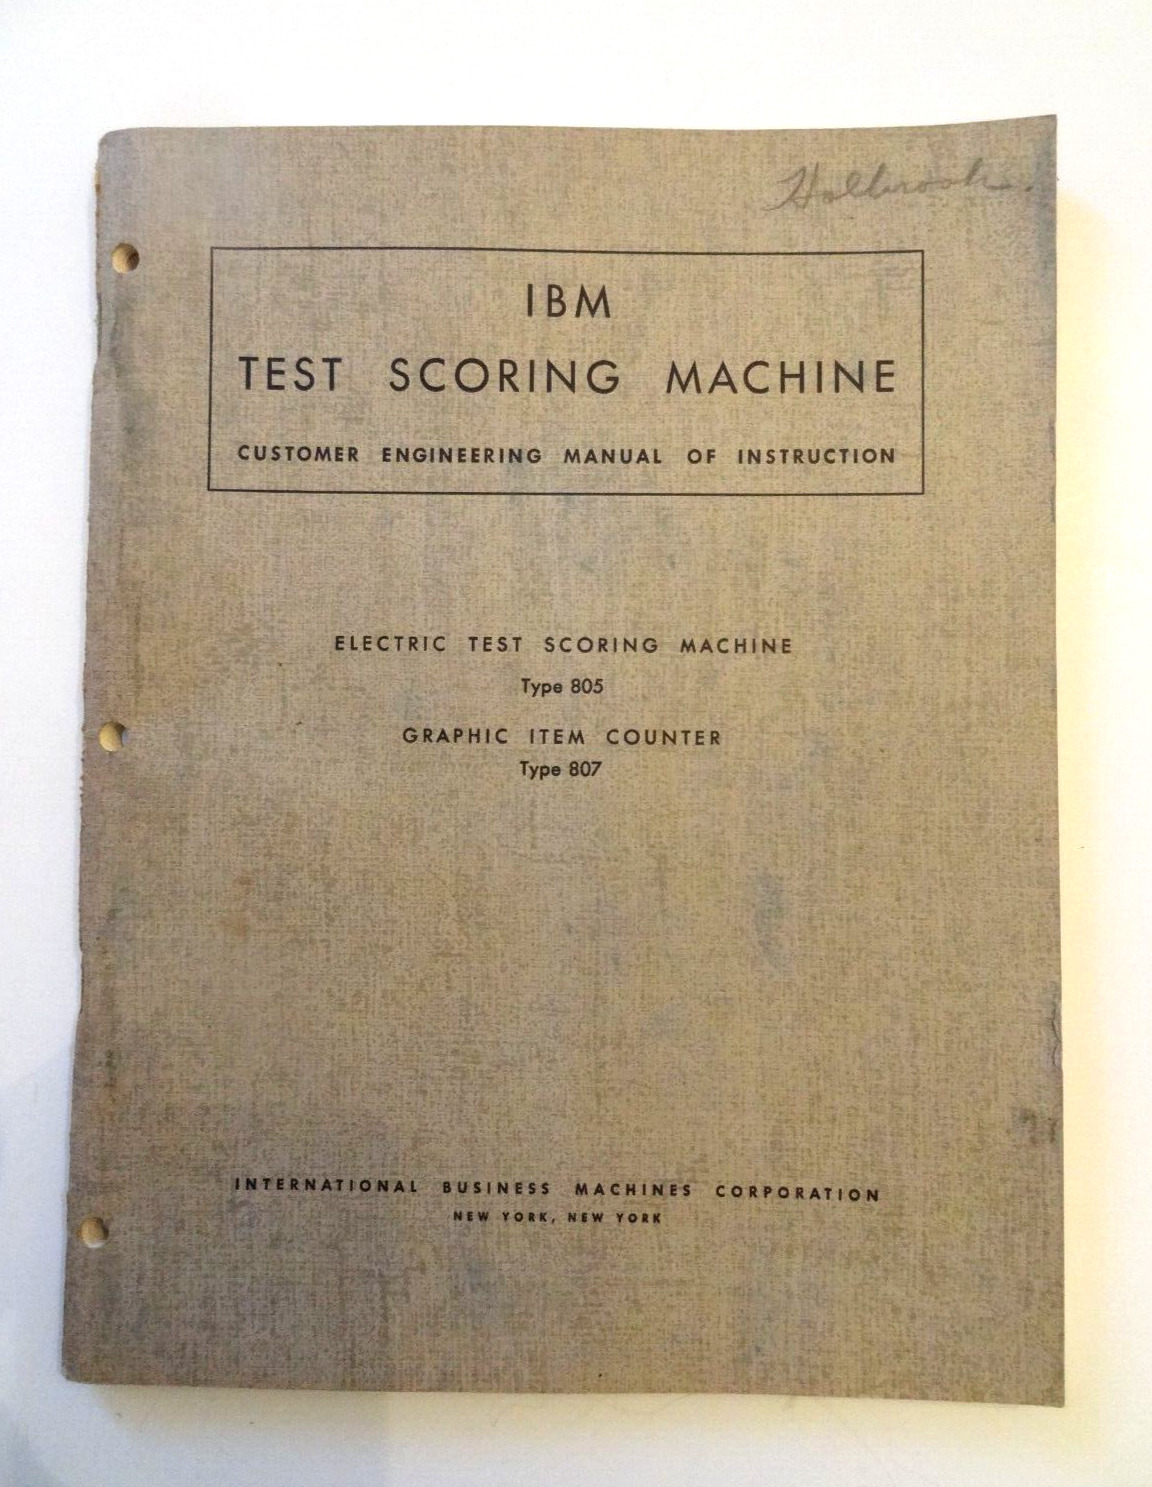 IBM Electric Test Scoring Machine Graphic Item Counter Manual Of Instructions